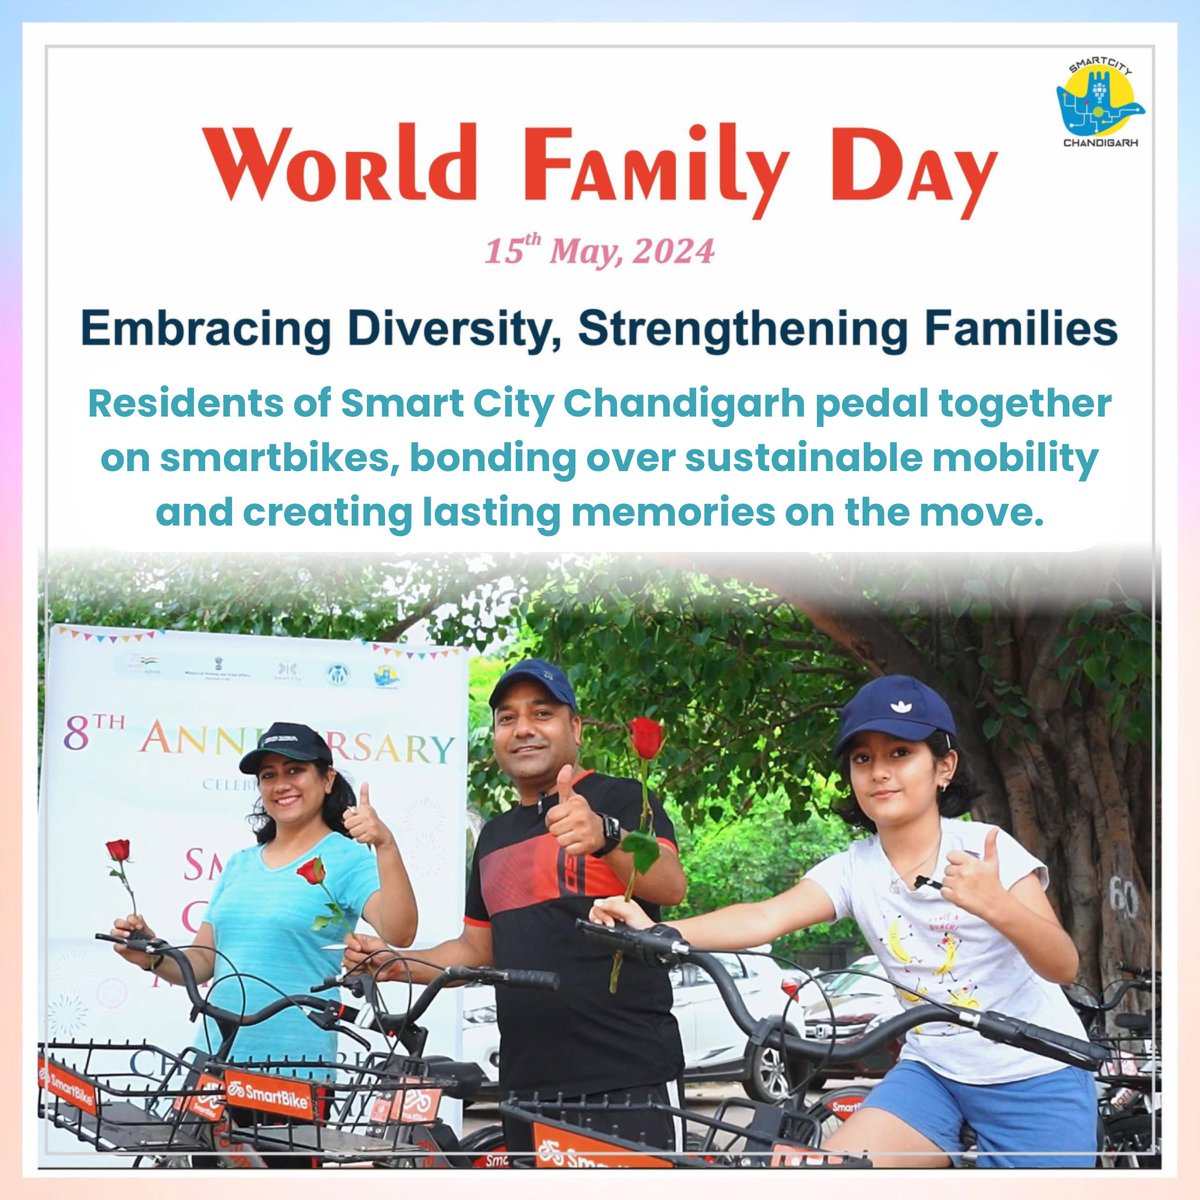 Two wheels, endless smiles – family rides on smart bikes! Chandigarh Smart City wishes everyone a wonderful #FamilyDay. 

Let's make memories riding on smart bikes and cherishing the moments with our loved ones.

#ChandigarhSmartCity #FamilyDay